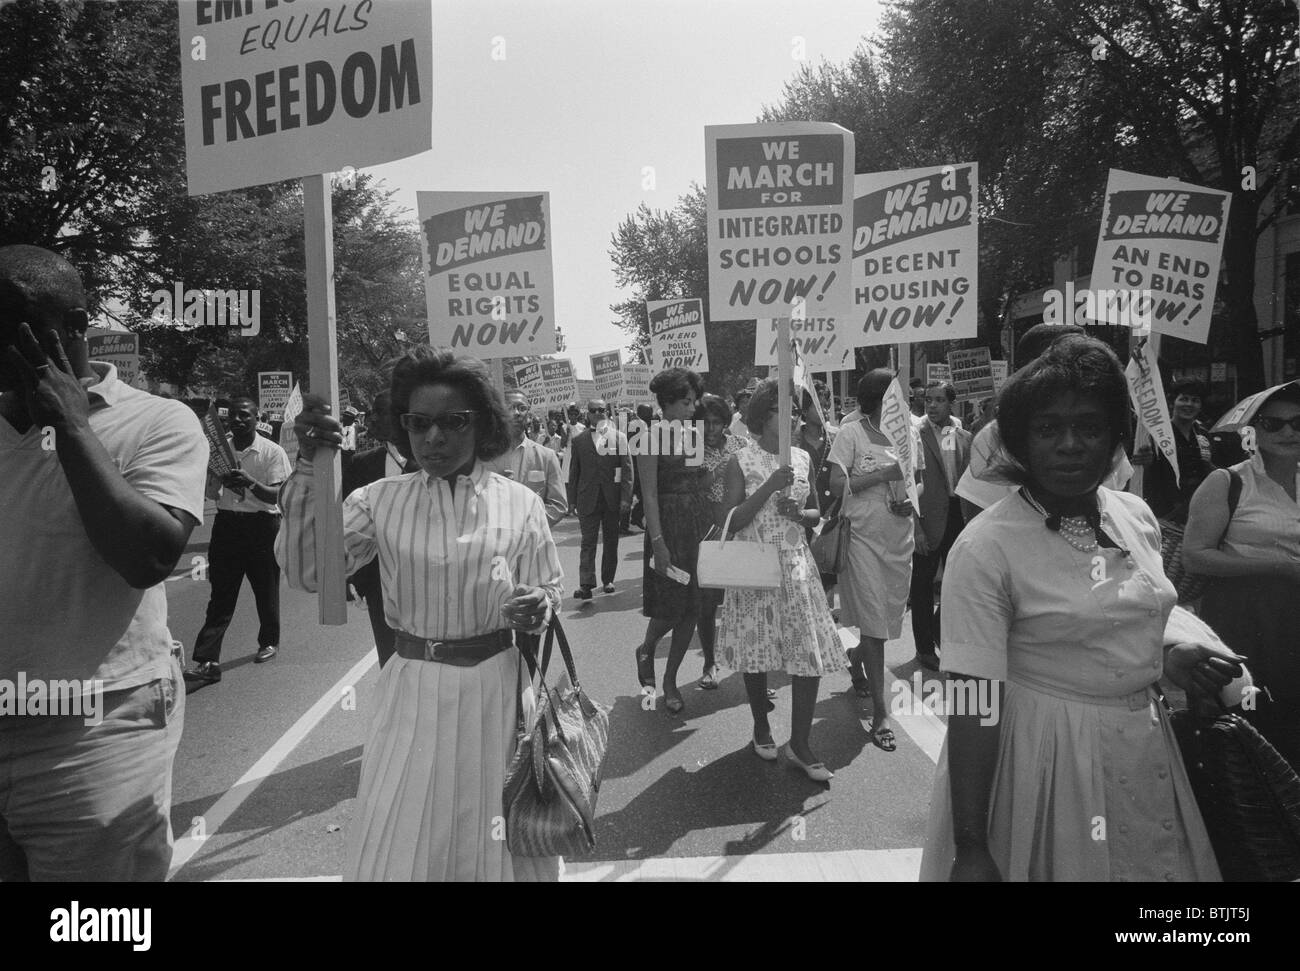 Civil rights march on Washington DC, a procession of African Americans carrying signs for equal rights, integrated schools, decent housing, and an end to bias, photograph by Warren K. Leffler, August 28, 1963. Stock Photo